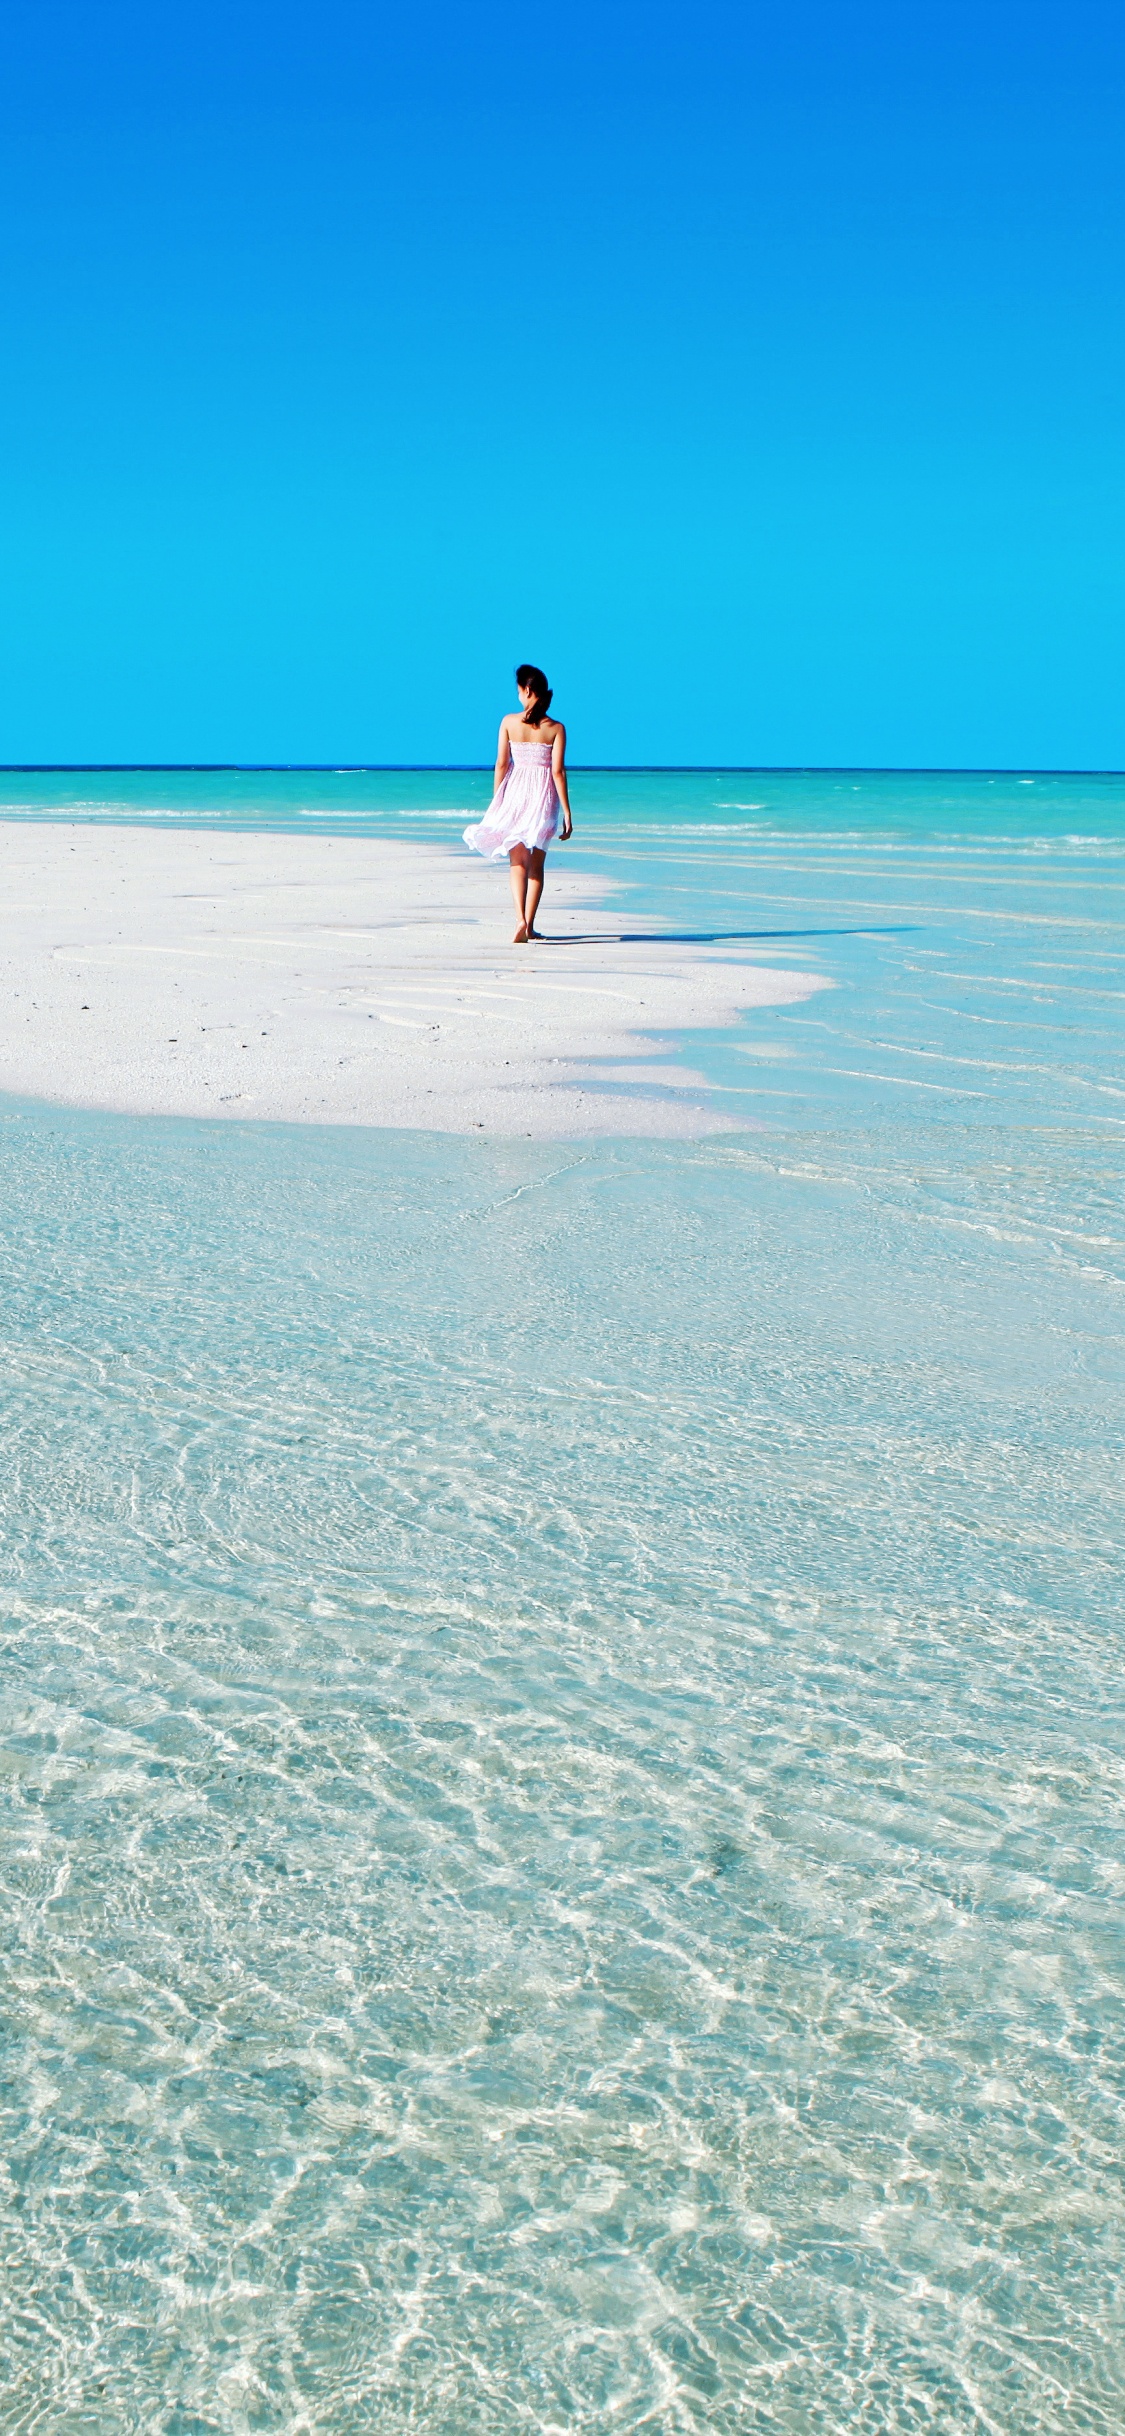 Woman in White Shirt Walking on Beach During Daytime. Wallpaper in 1125x2436 Resolution